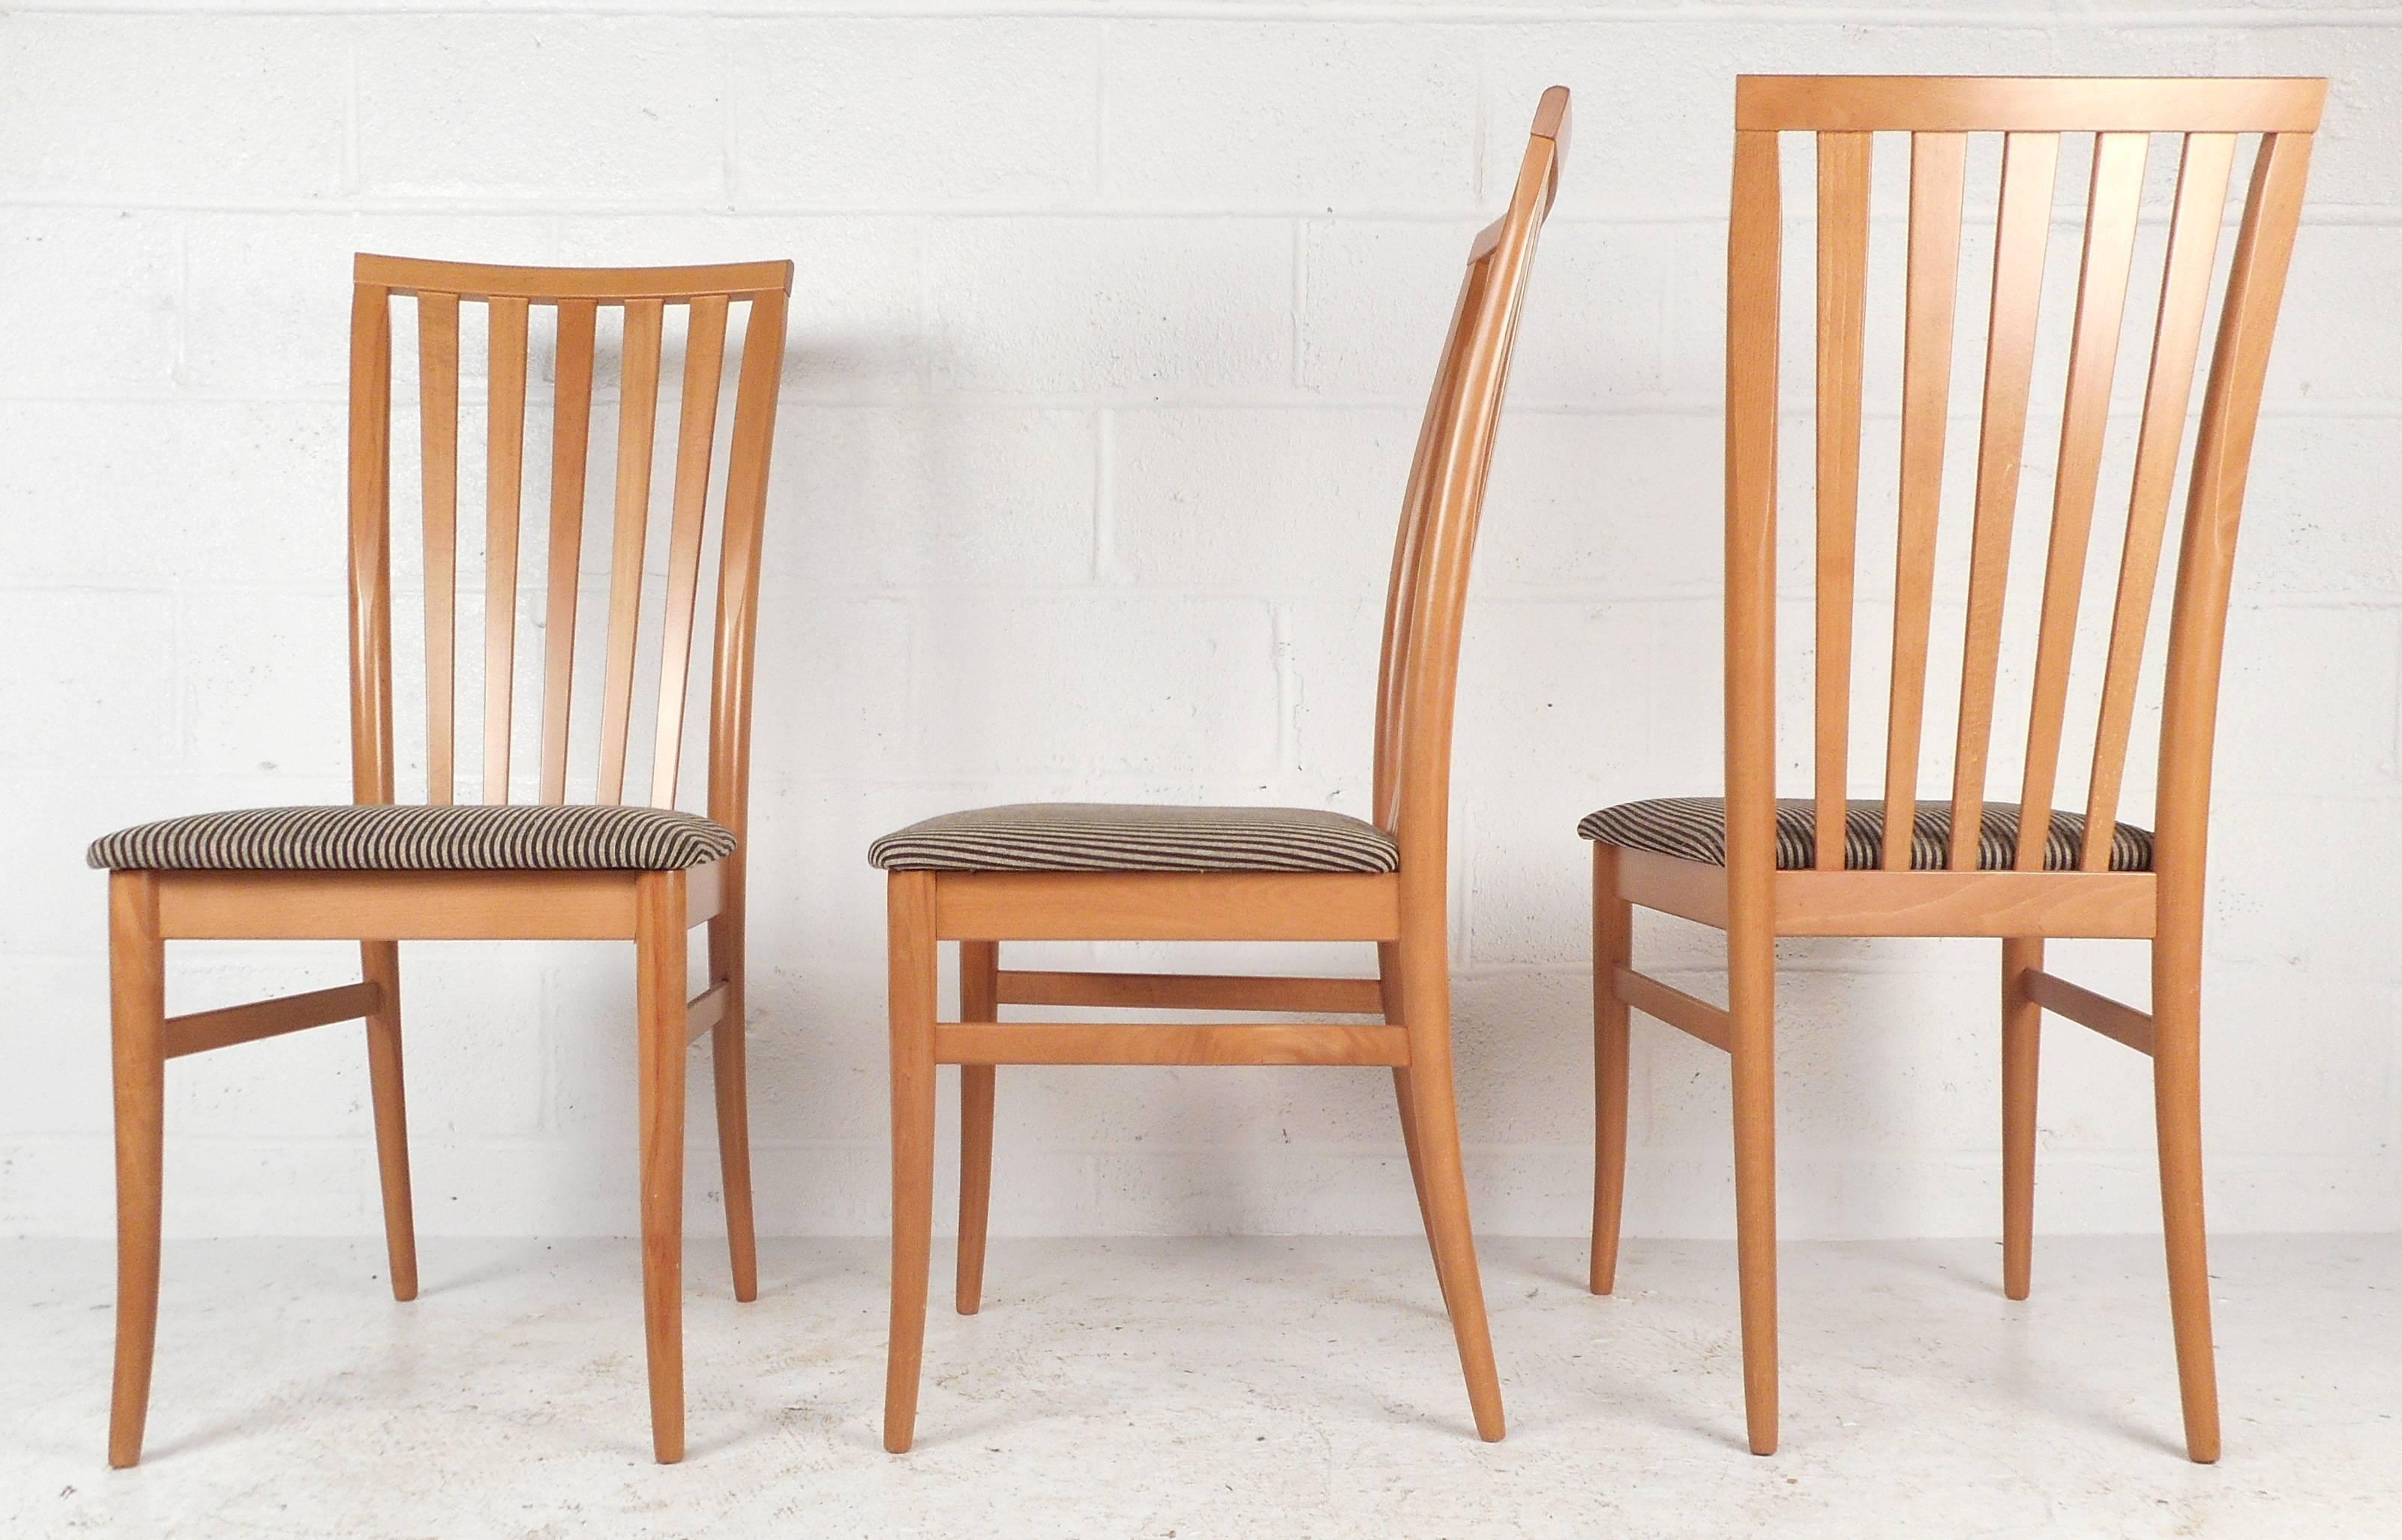 This beautiful set of four Mid-Century style modern dining chairs features unique curved legs, upholstered seating, vintage maple finish, and ergonomic vertical slat back rests. Please confirm item location (NY or NJ).